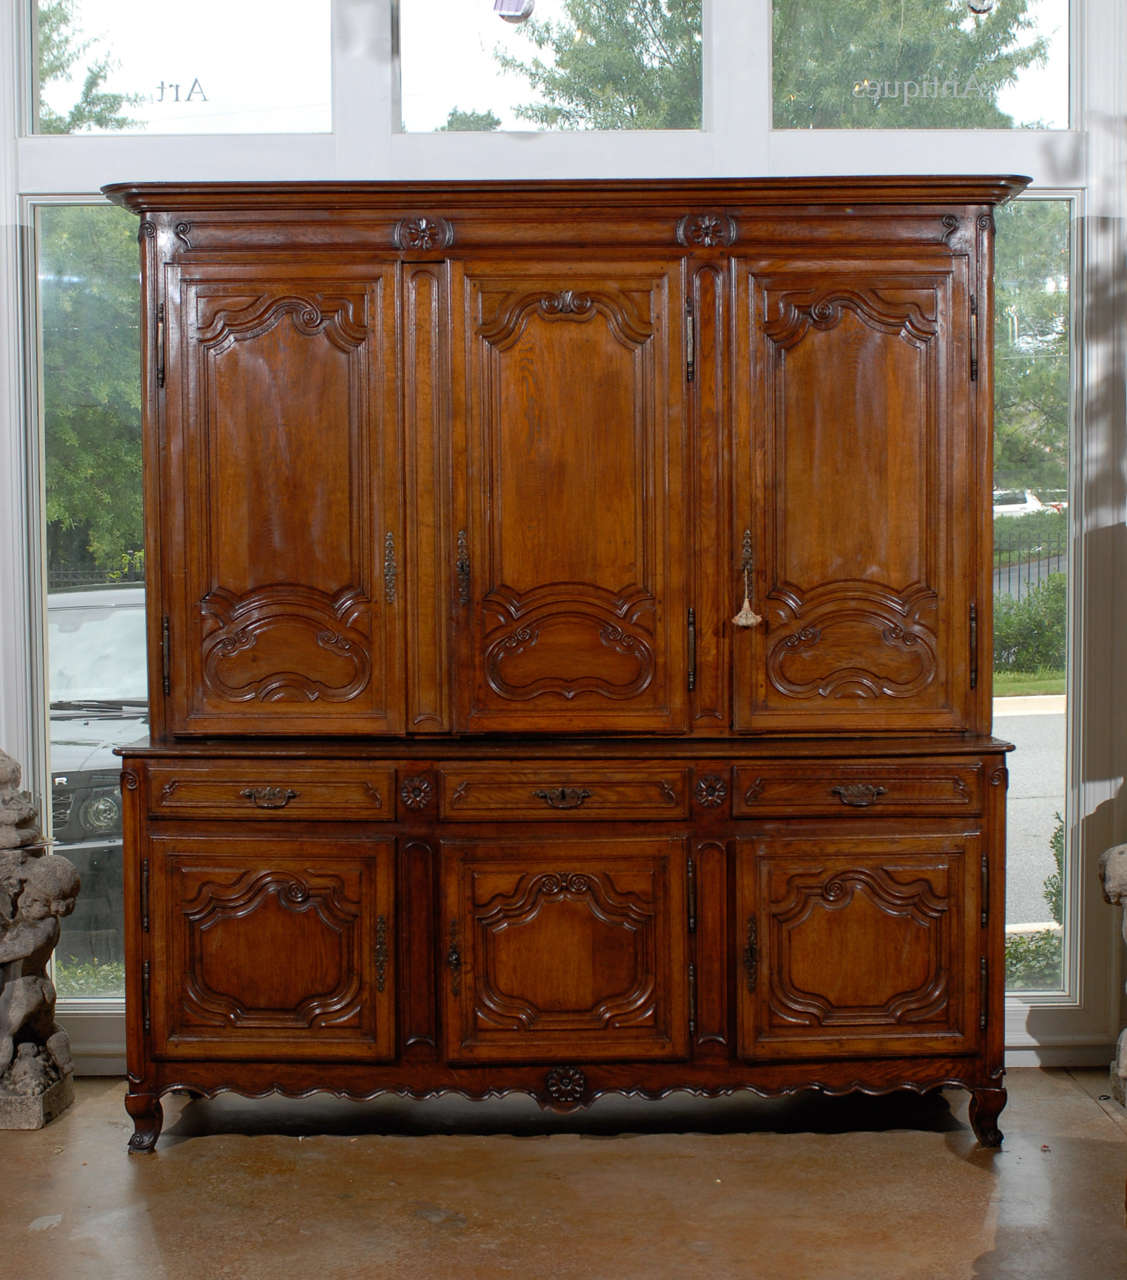 A French period Louis XV mid-18th century carved wood enfilade à deux-corps from the Lorraine region. This French cabinet was born in the Eastern Lorraine region of France in the later years of the reign of King Louis XV. Featuring a large molded